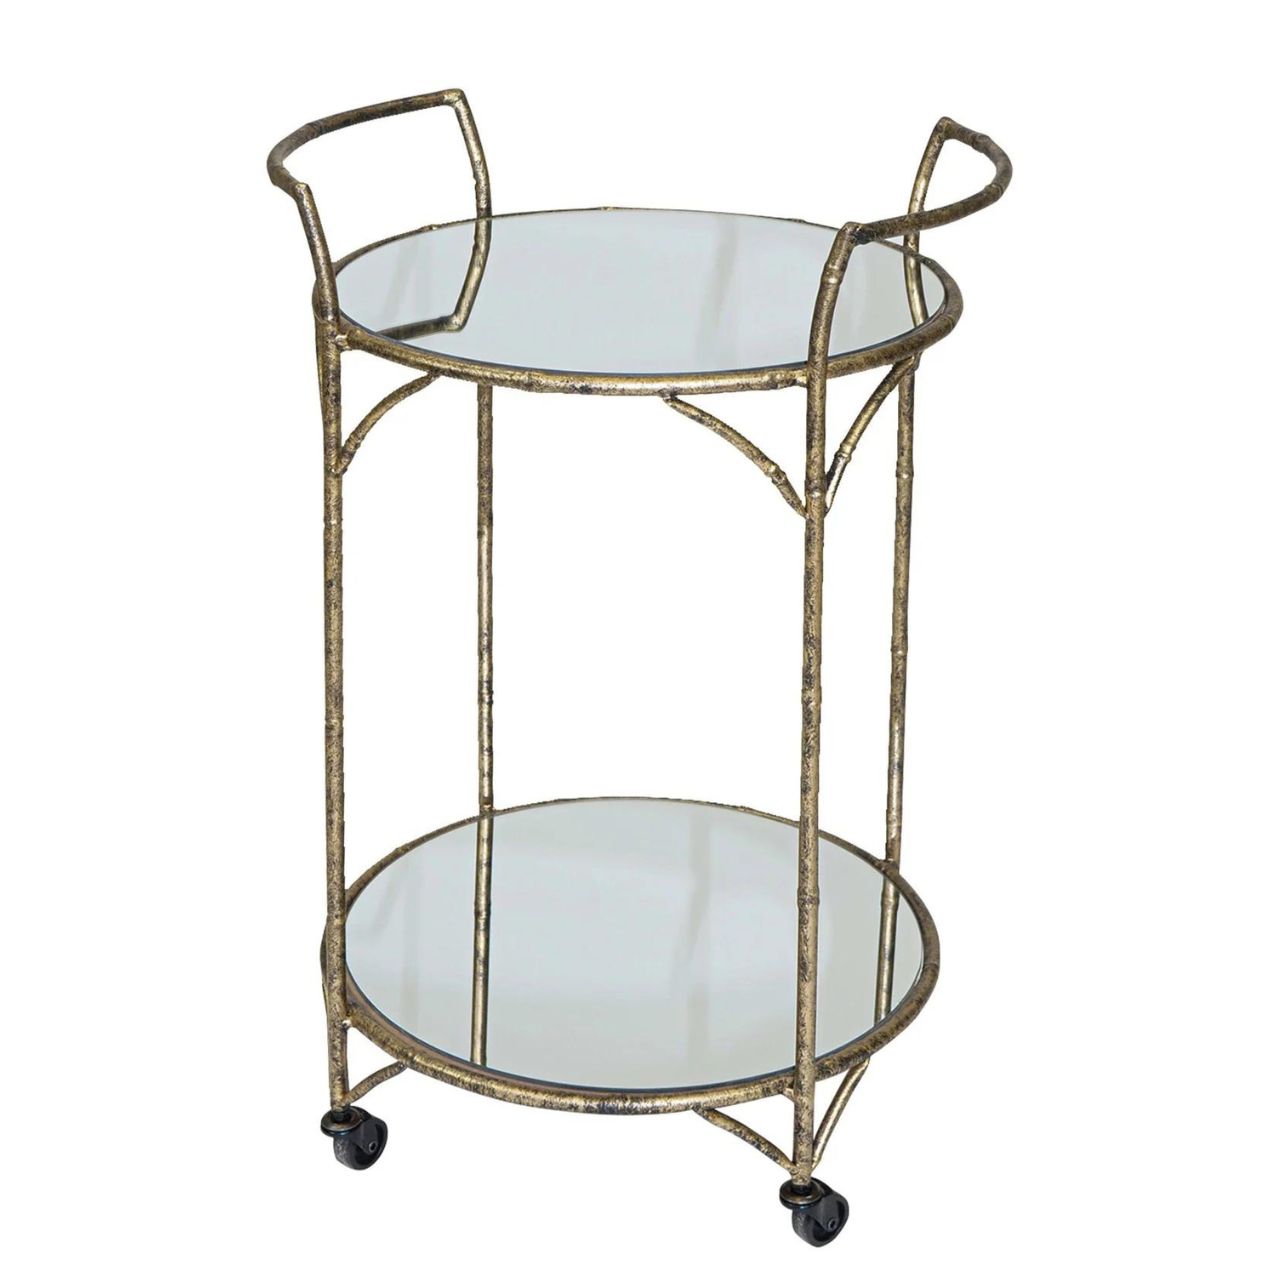 Danrich Drinks Trolley by Mindy Brownes  - Mindy Brownes Drinks Trolley - Sip Sip Hooray, - Introducing the Danrich drinks trolley for smaller spaces. - Make your dinner party one to remember and a service as easy as one-two-three! - Featuring one mirrored top and one mirrored bottom shelf.